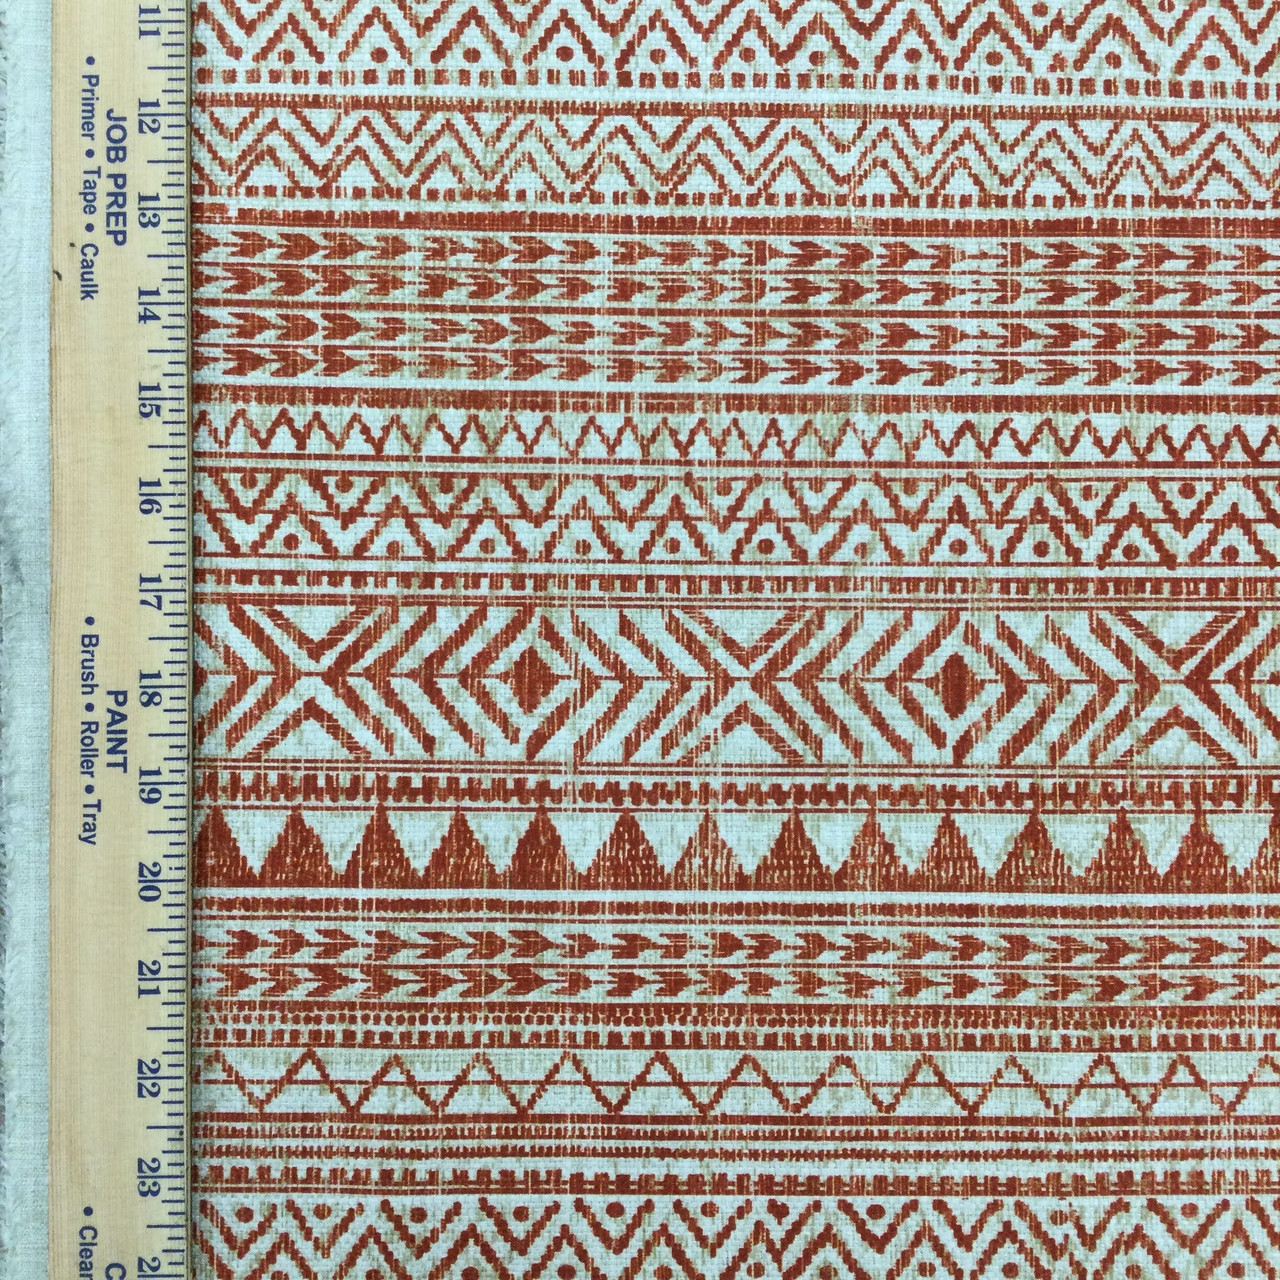 Boho Aztec Striped Fabric in Pepper Red and Natural | Home Decor / Drapery  | 54 Wide | By the Yard | Regal Fabrics